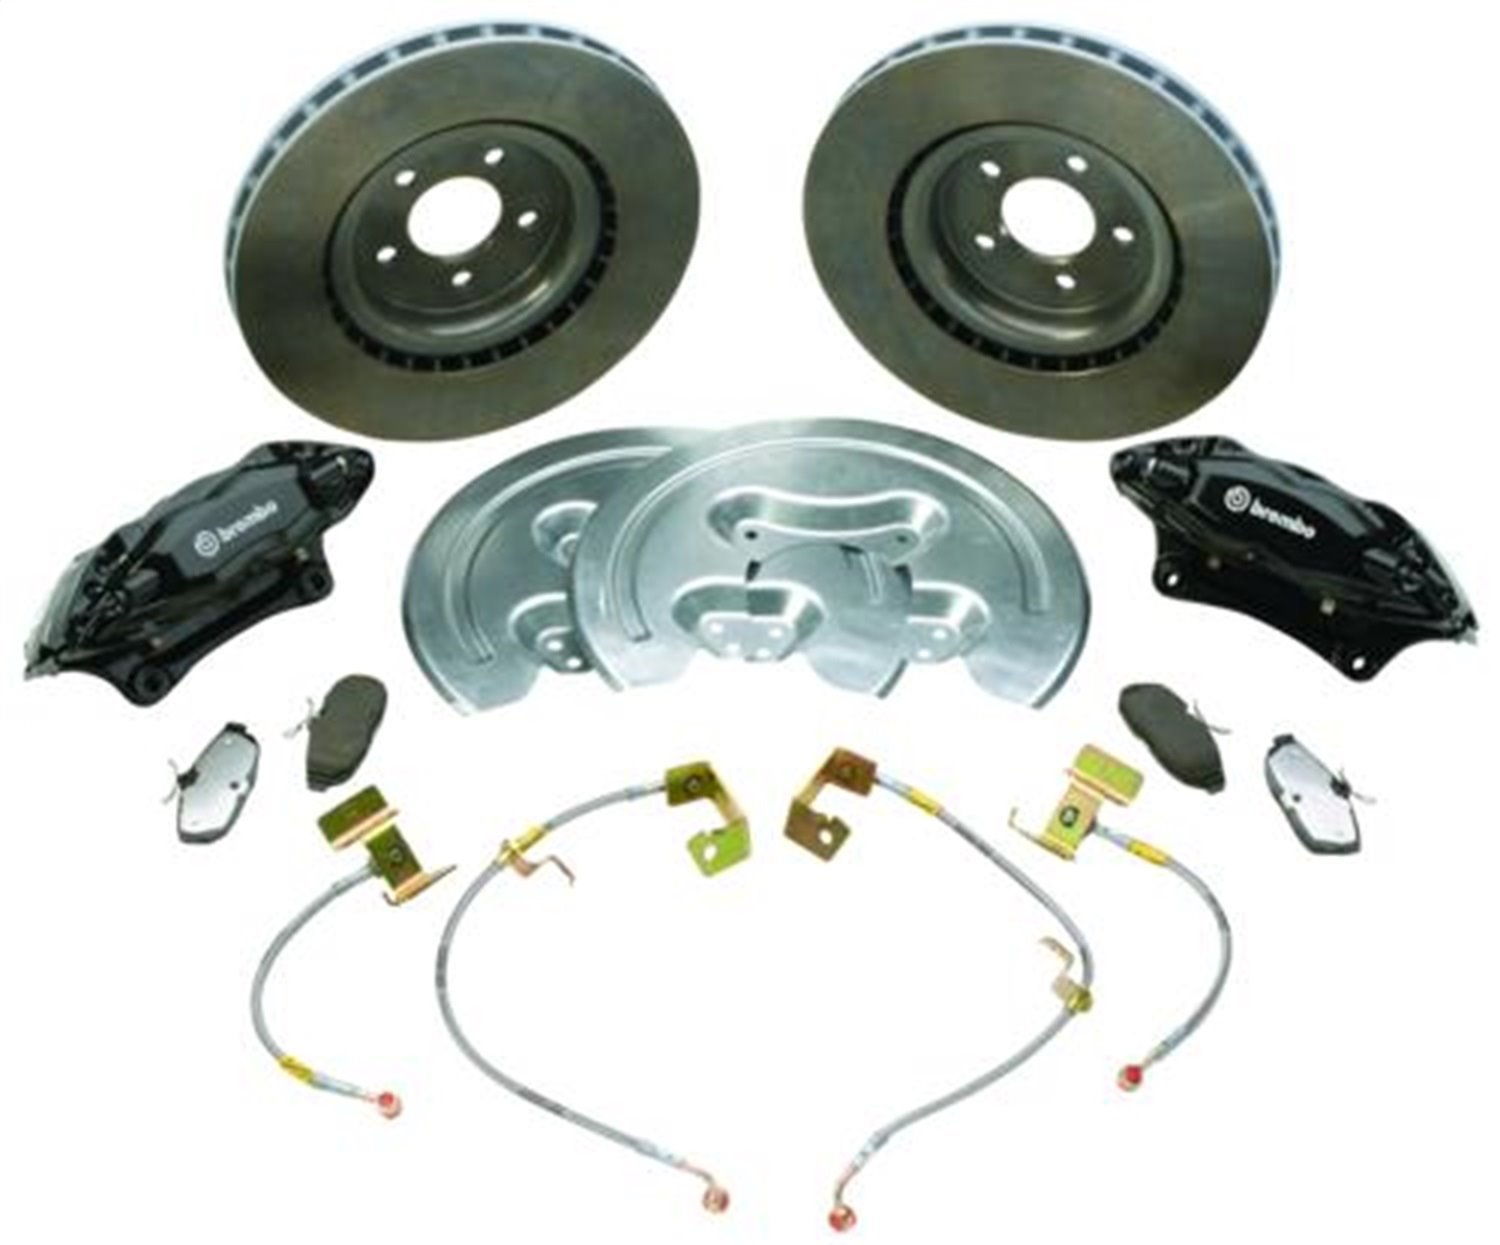 Front Brake Upgrade Kit 2005-14 Mustang GT Includes: